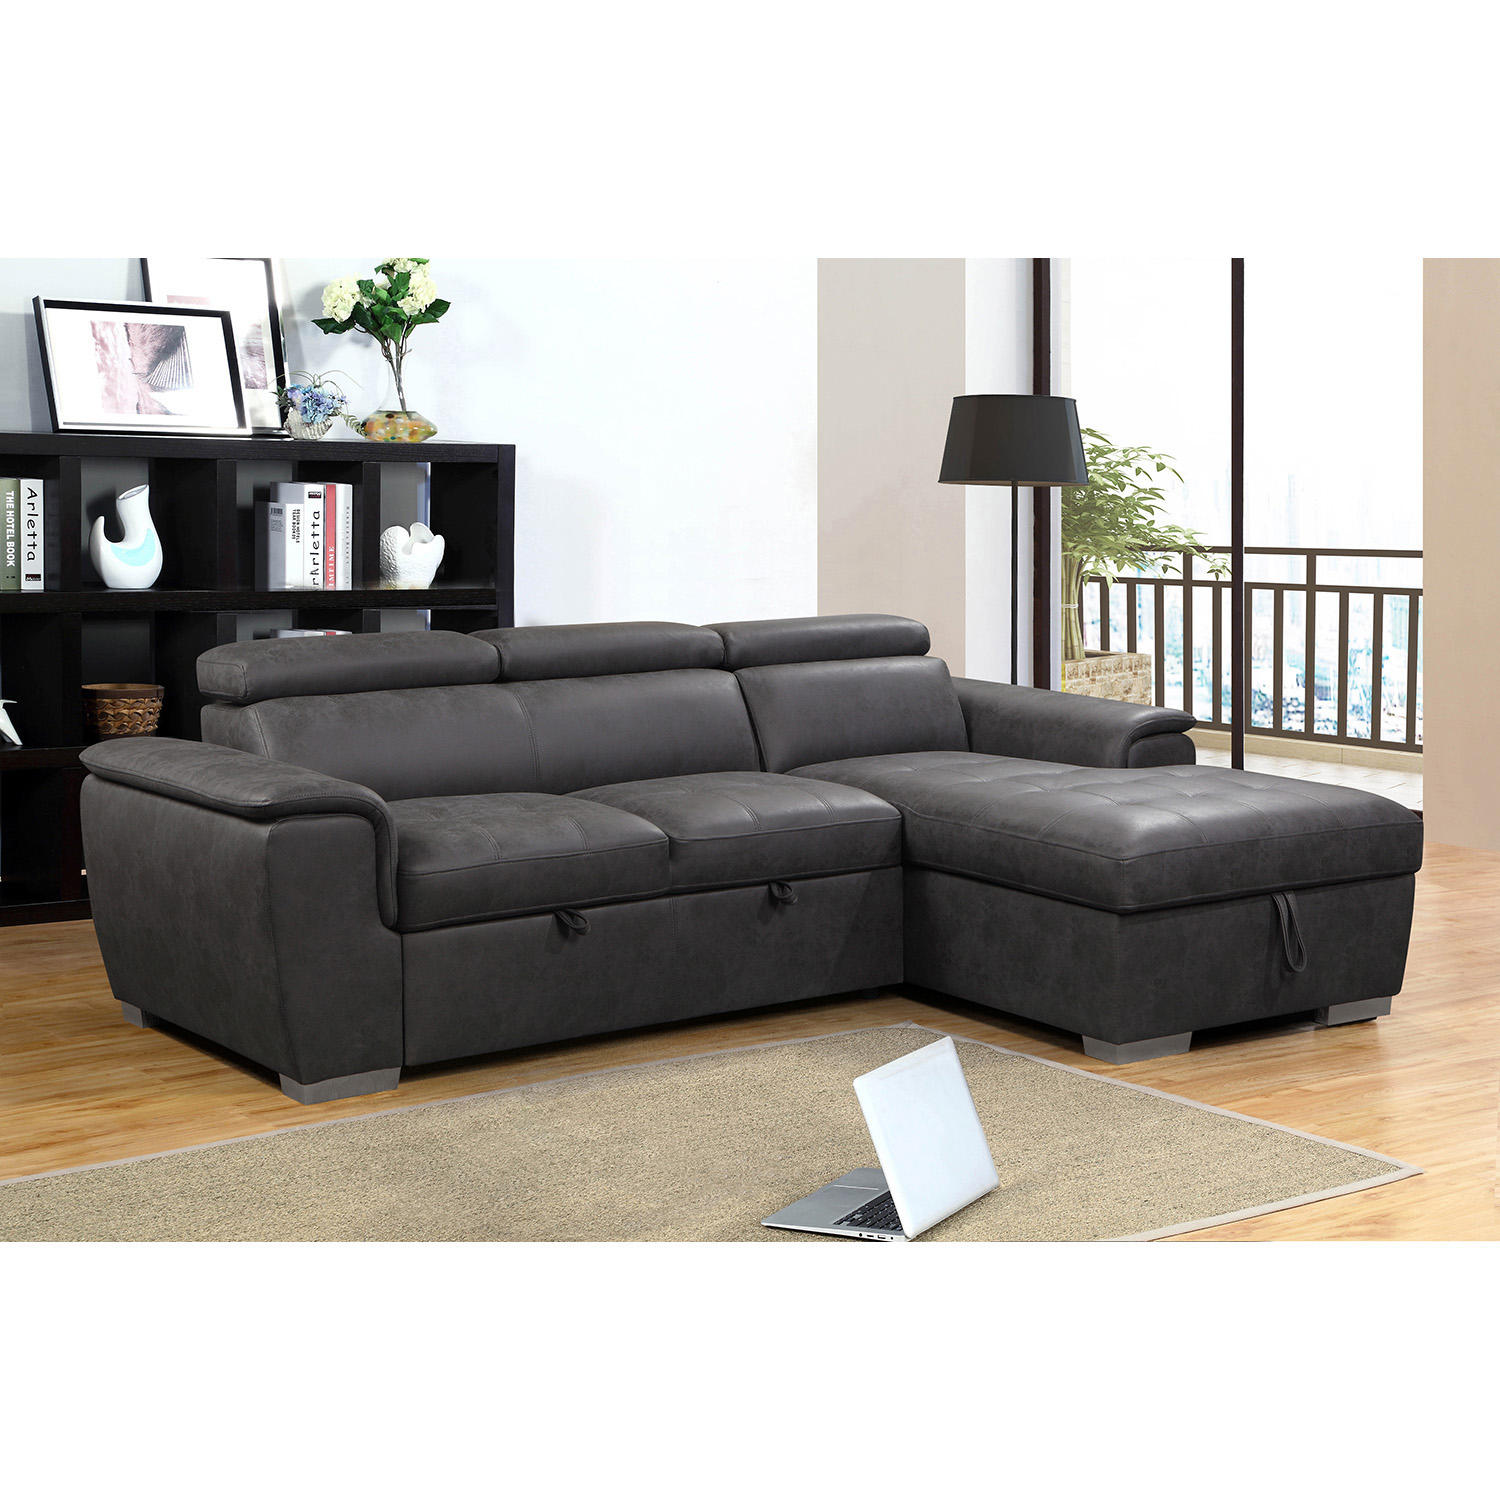 Abbyson Living Cameron Stain-Resistant Sectional Sofa with Storage and Pullout Bed